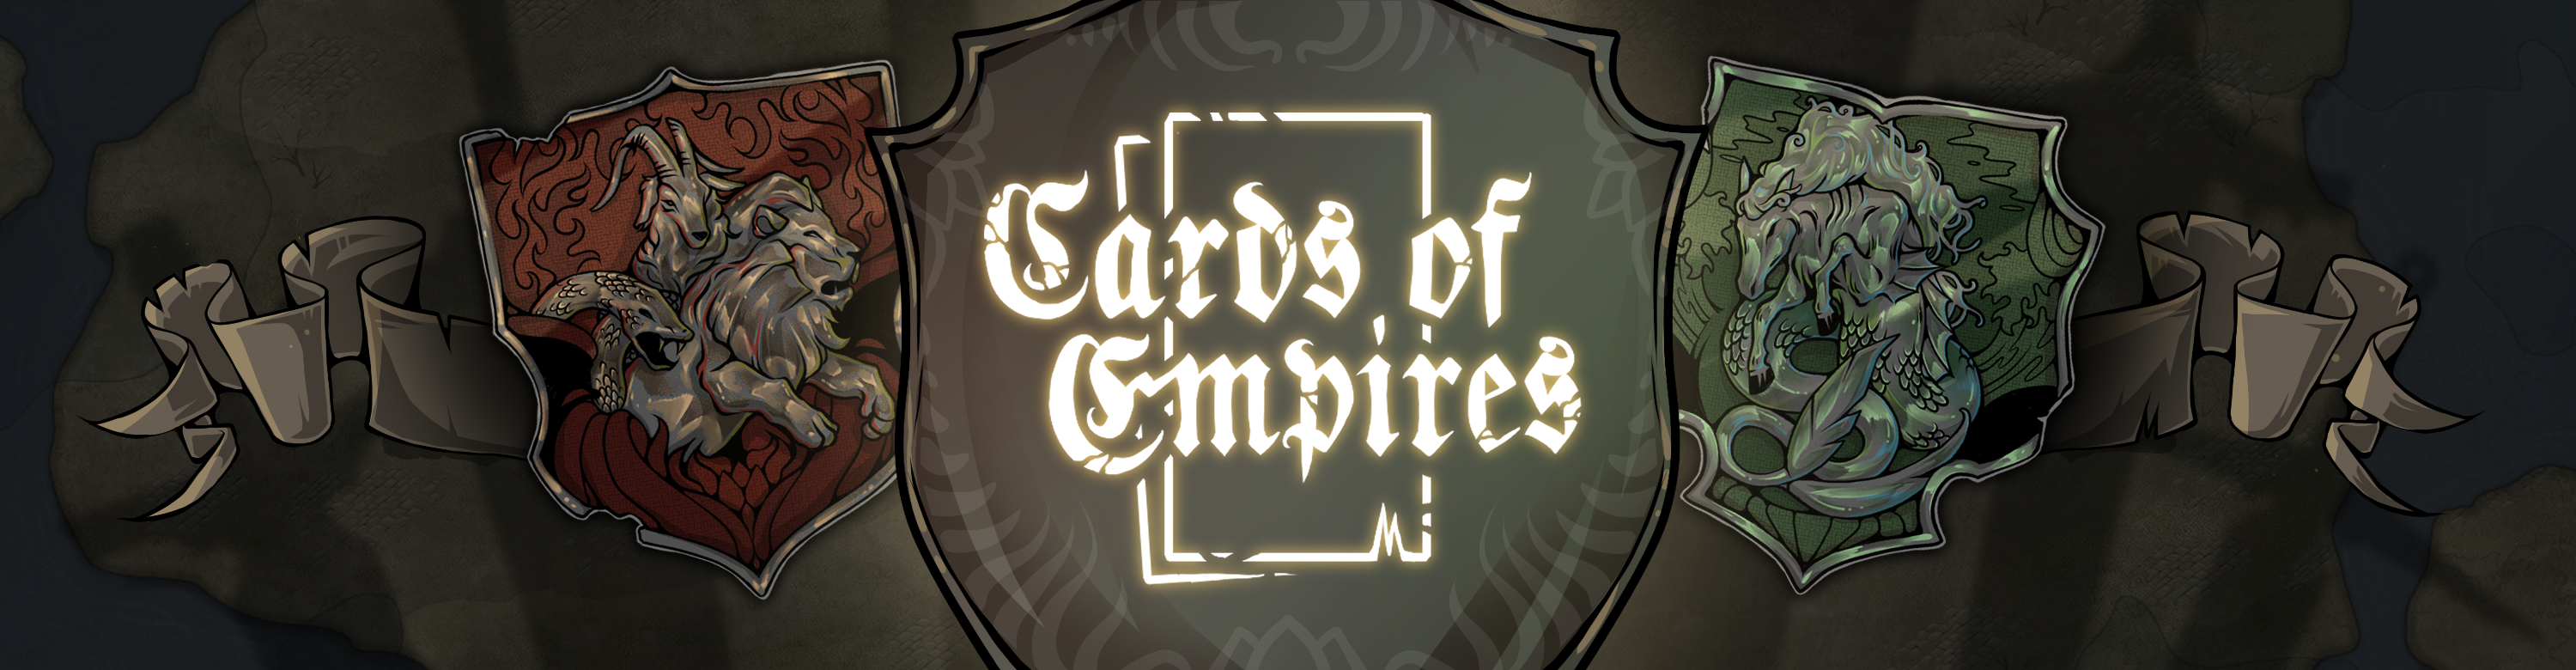 Cards of Empires